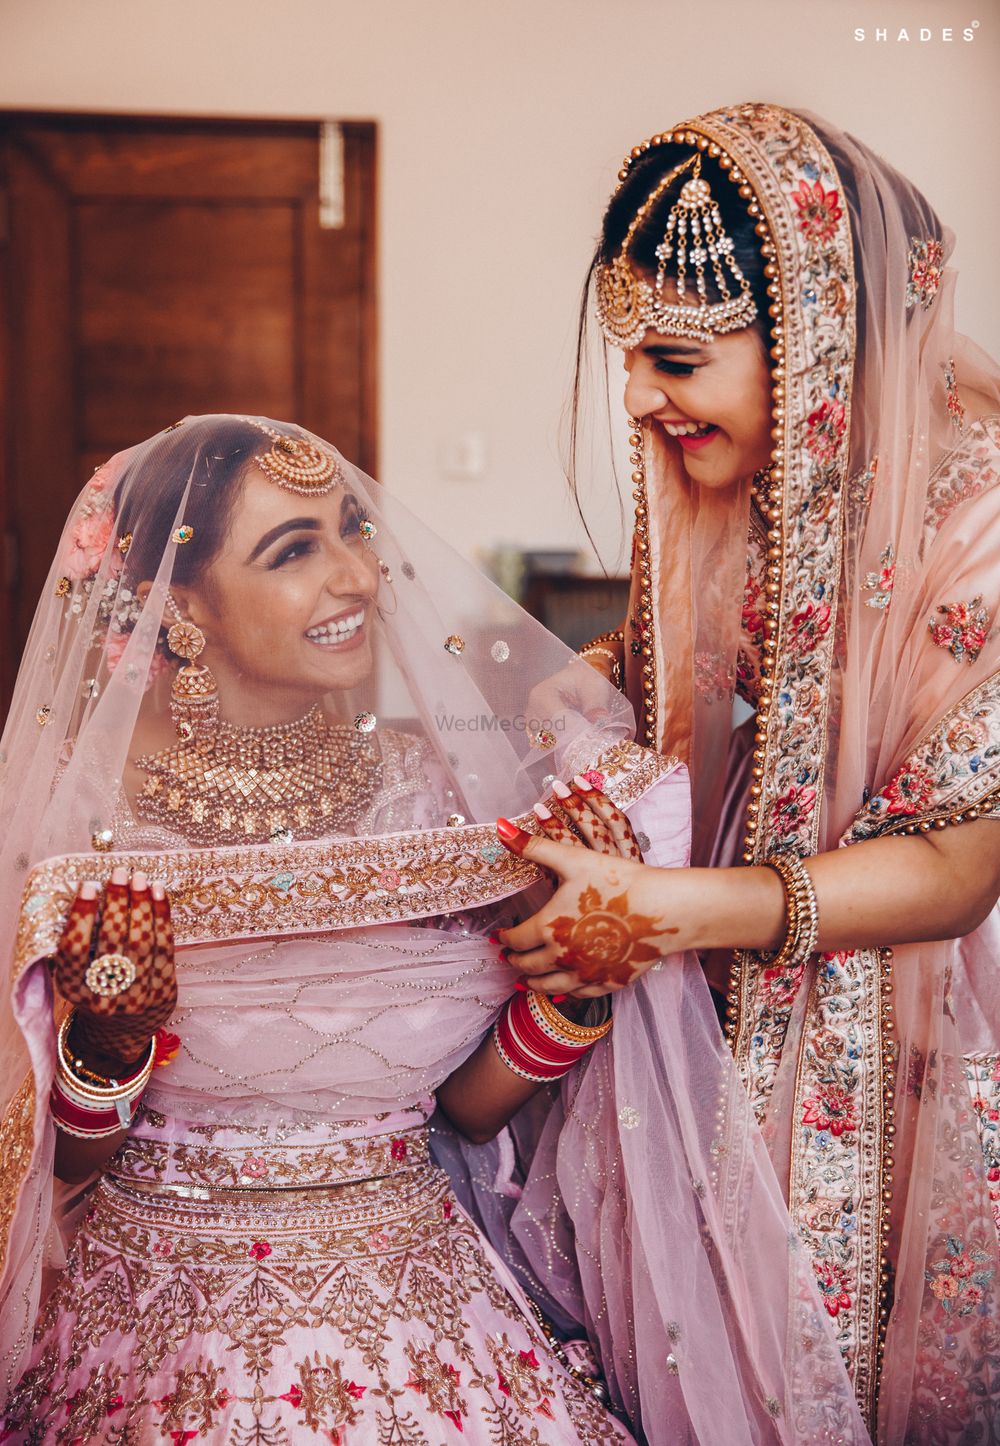 Photo of A bride getting ready with the help of her sister